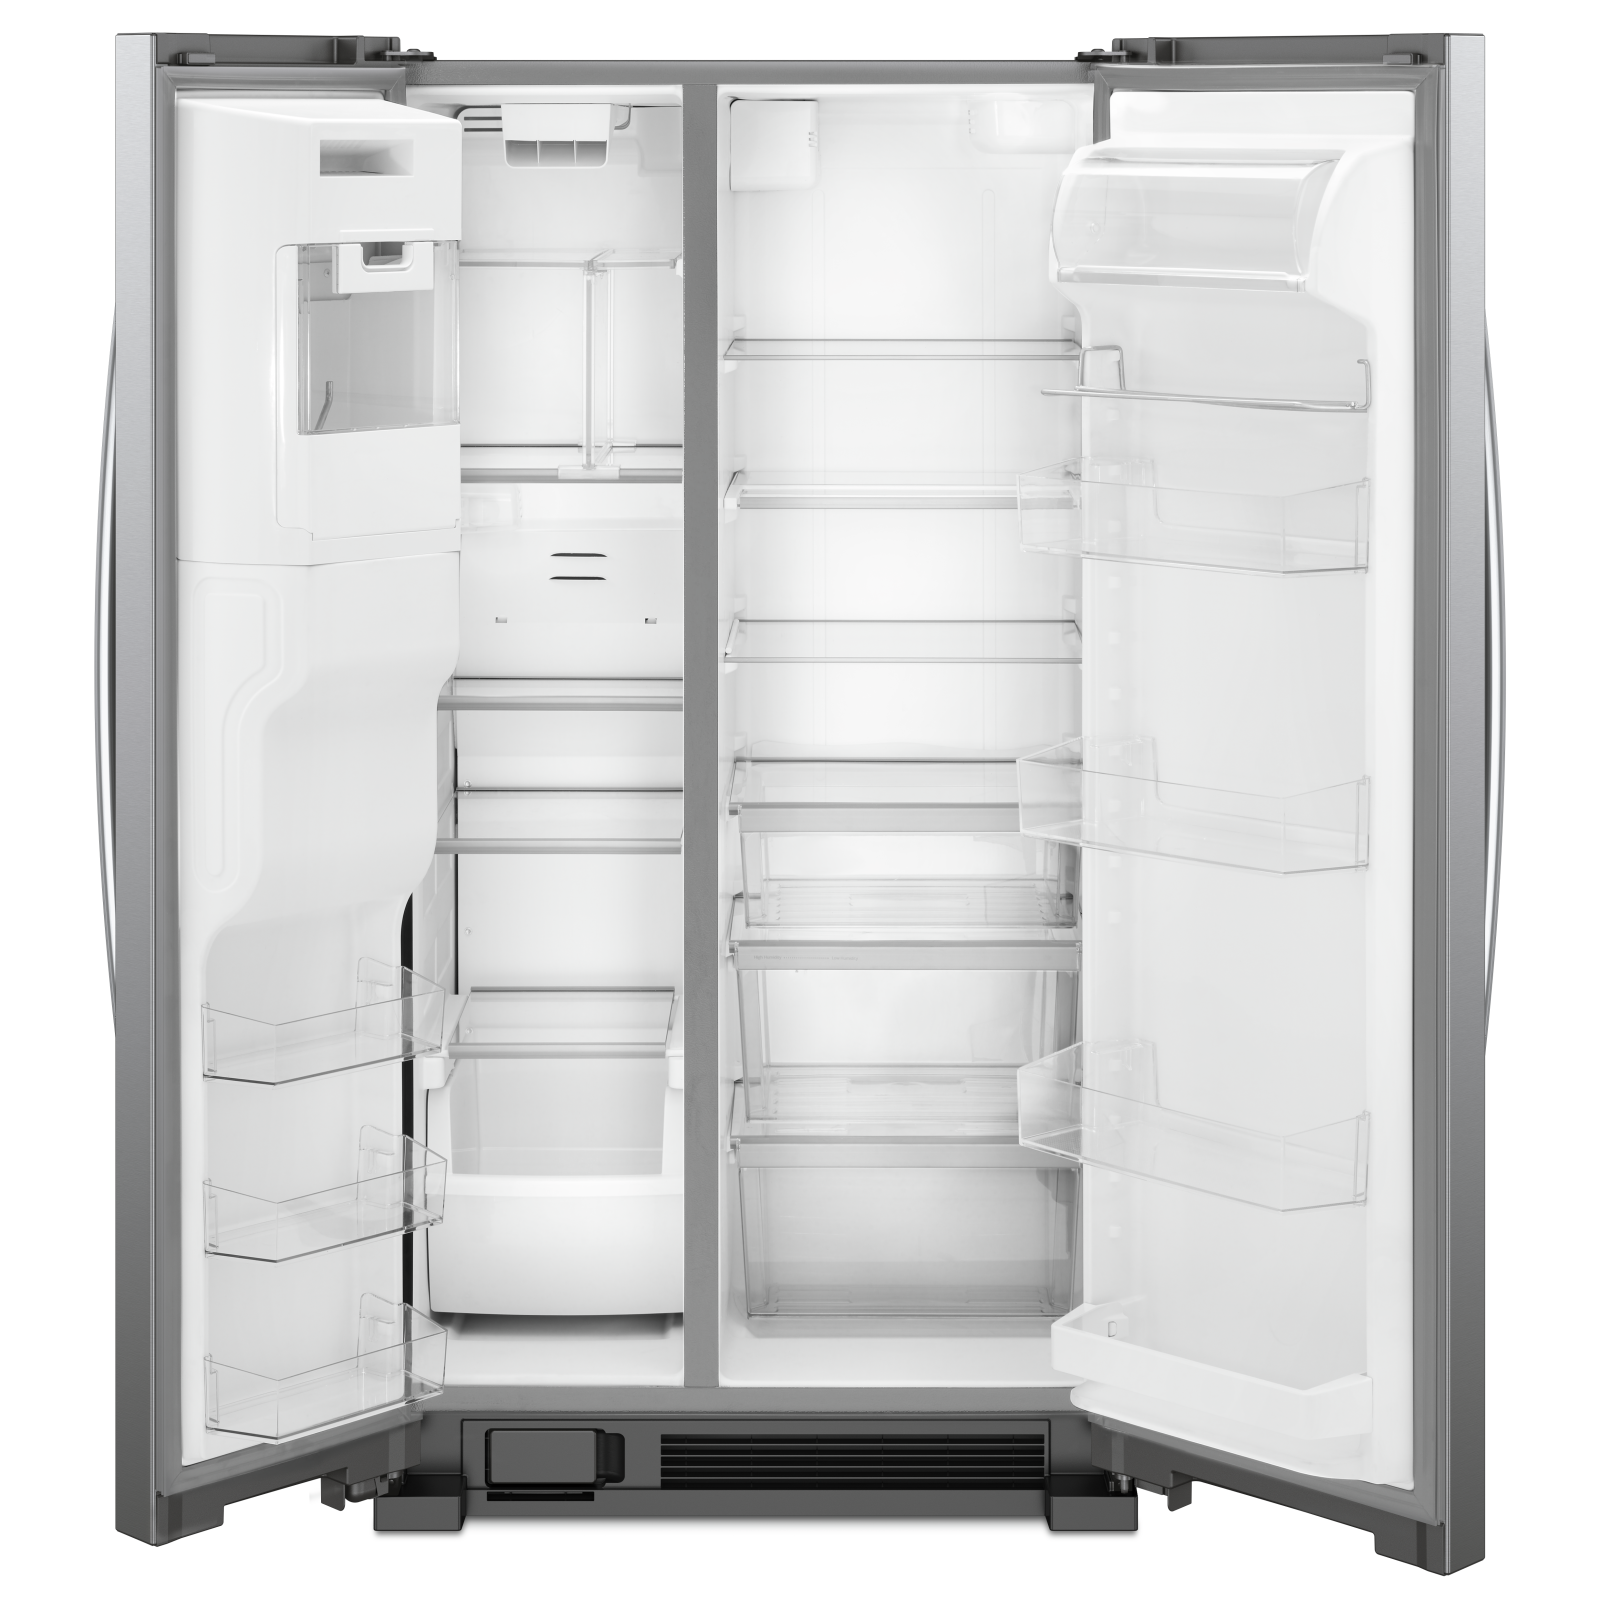 Whirlpool - 35.875 Inch 25 cu. ft Side by Side Refrigerator in Stainless - WRS555SIHZ